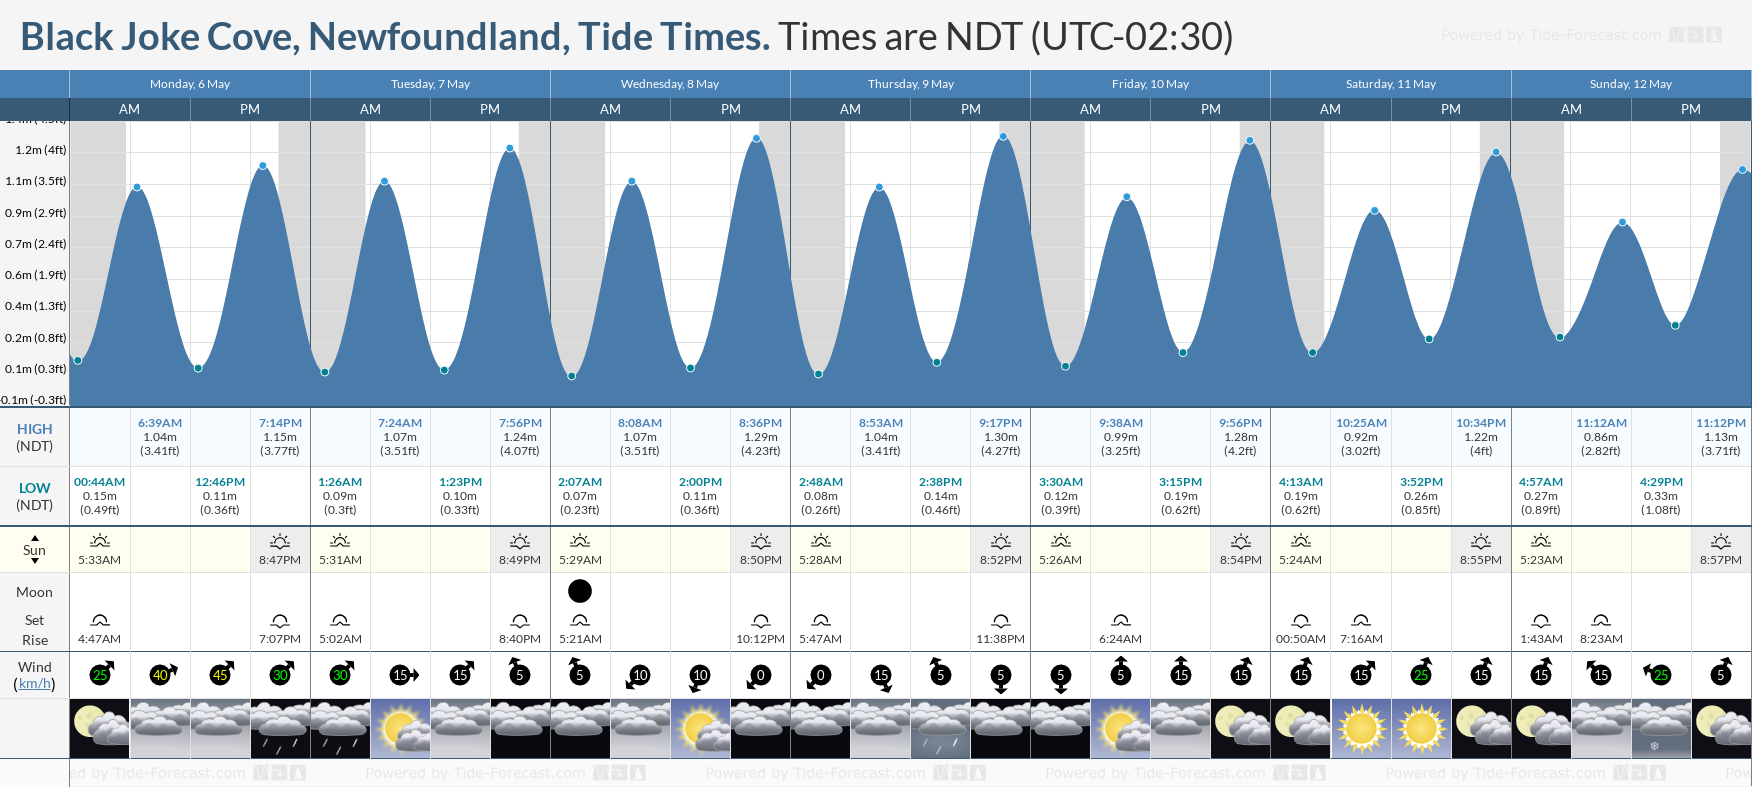 Black Joke Cove, Newfoundland Tide Chart including high and low tide tide times for the next 7 days